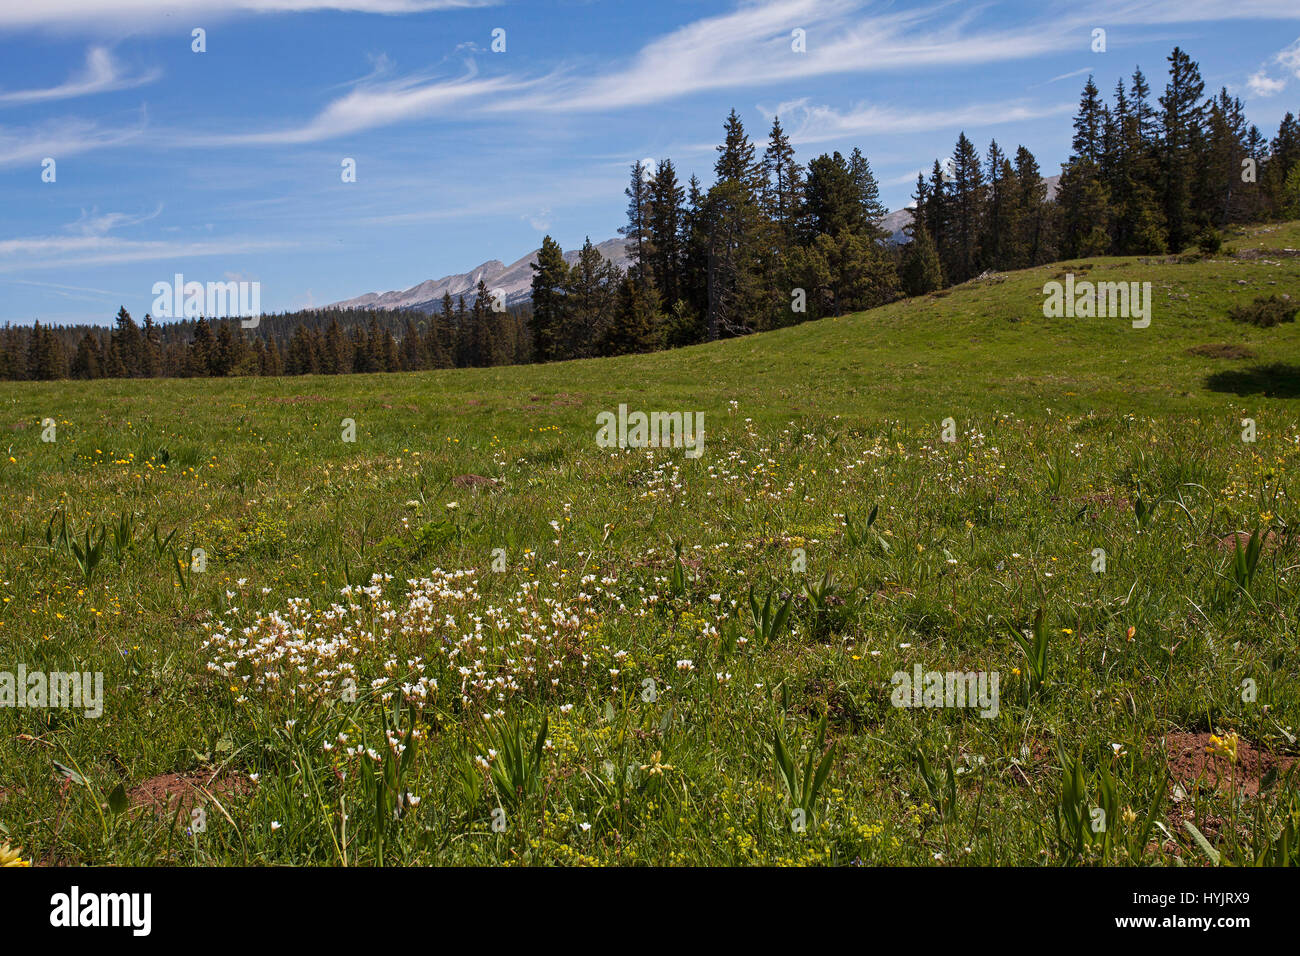 Meadow saxifrage Saxifraga granulata in wild flower meadow with the Grand Veymont ridge beyond Haut Plateau Reserve Vercors Regional Natural Park Verc Stock Photo